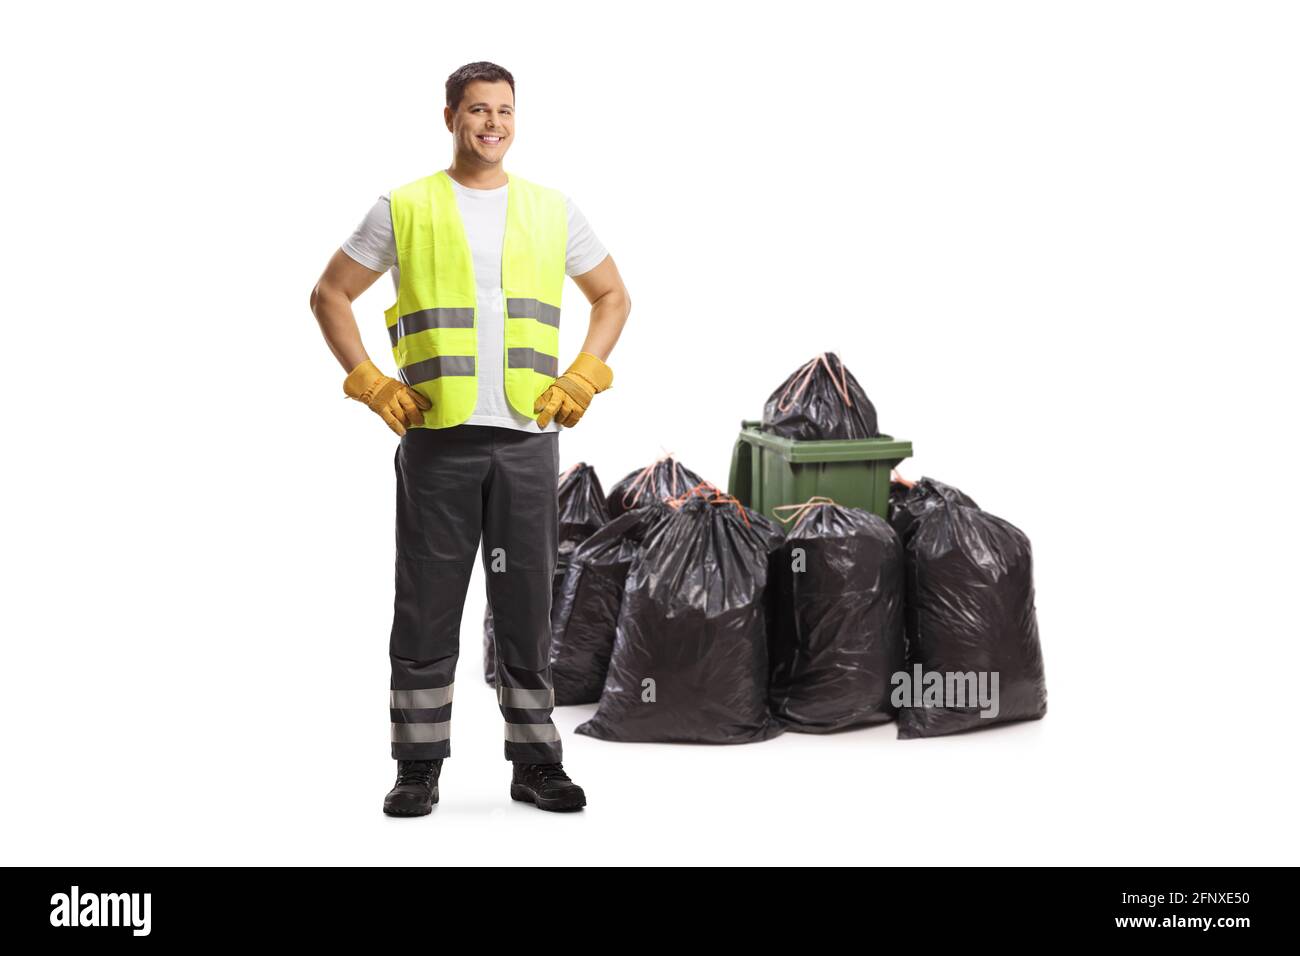 Full length portrait of a waste collector standing in front of bin bags isolated on white background Stock Photo